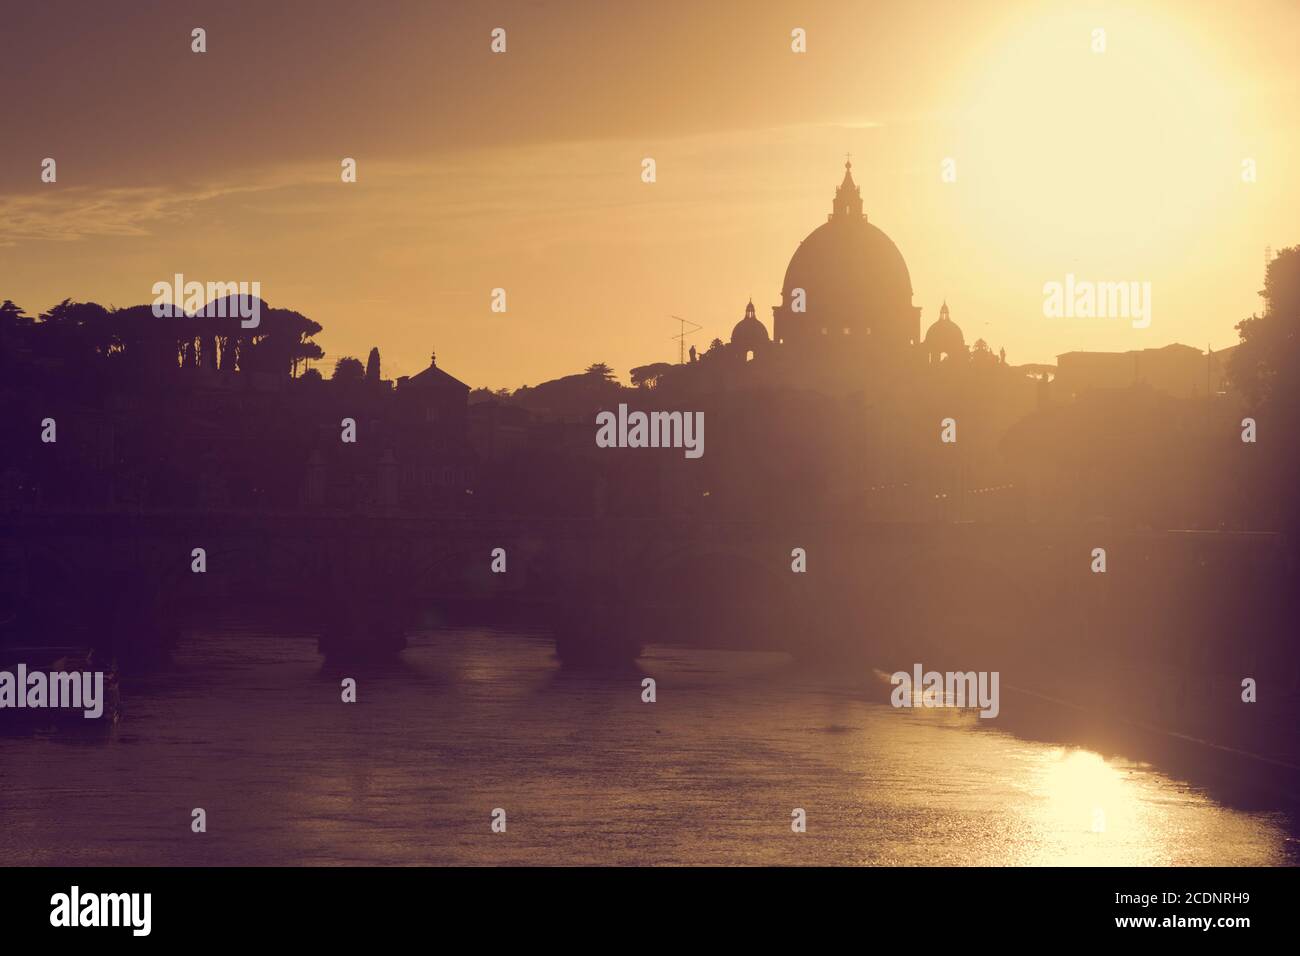 St. Peter#39;s Basilica, Vatican City.  Tiber river in Rome, Italy at sunset Stock Photo